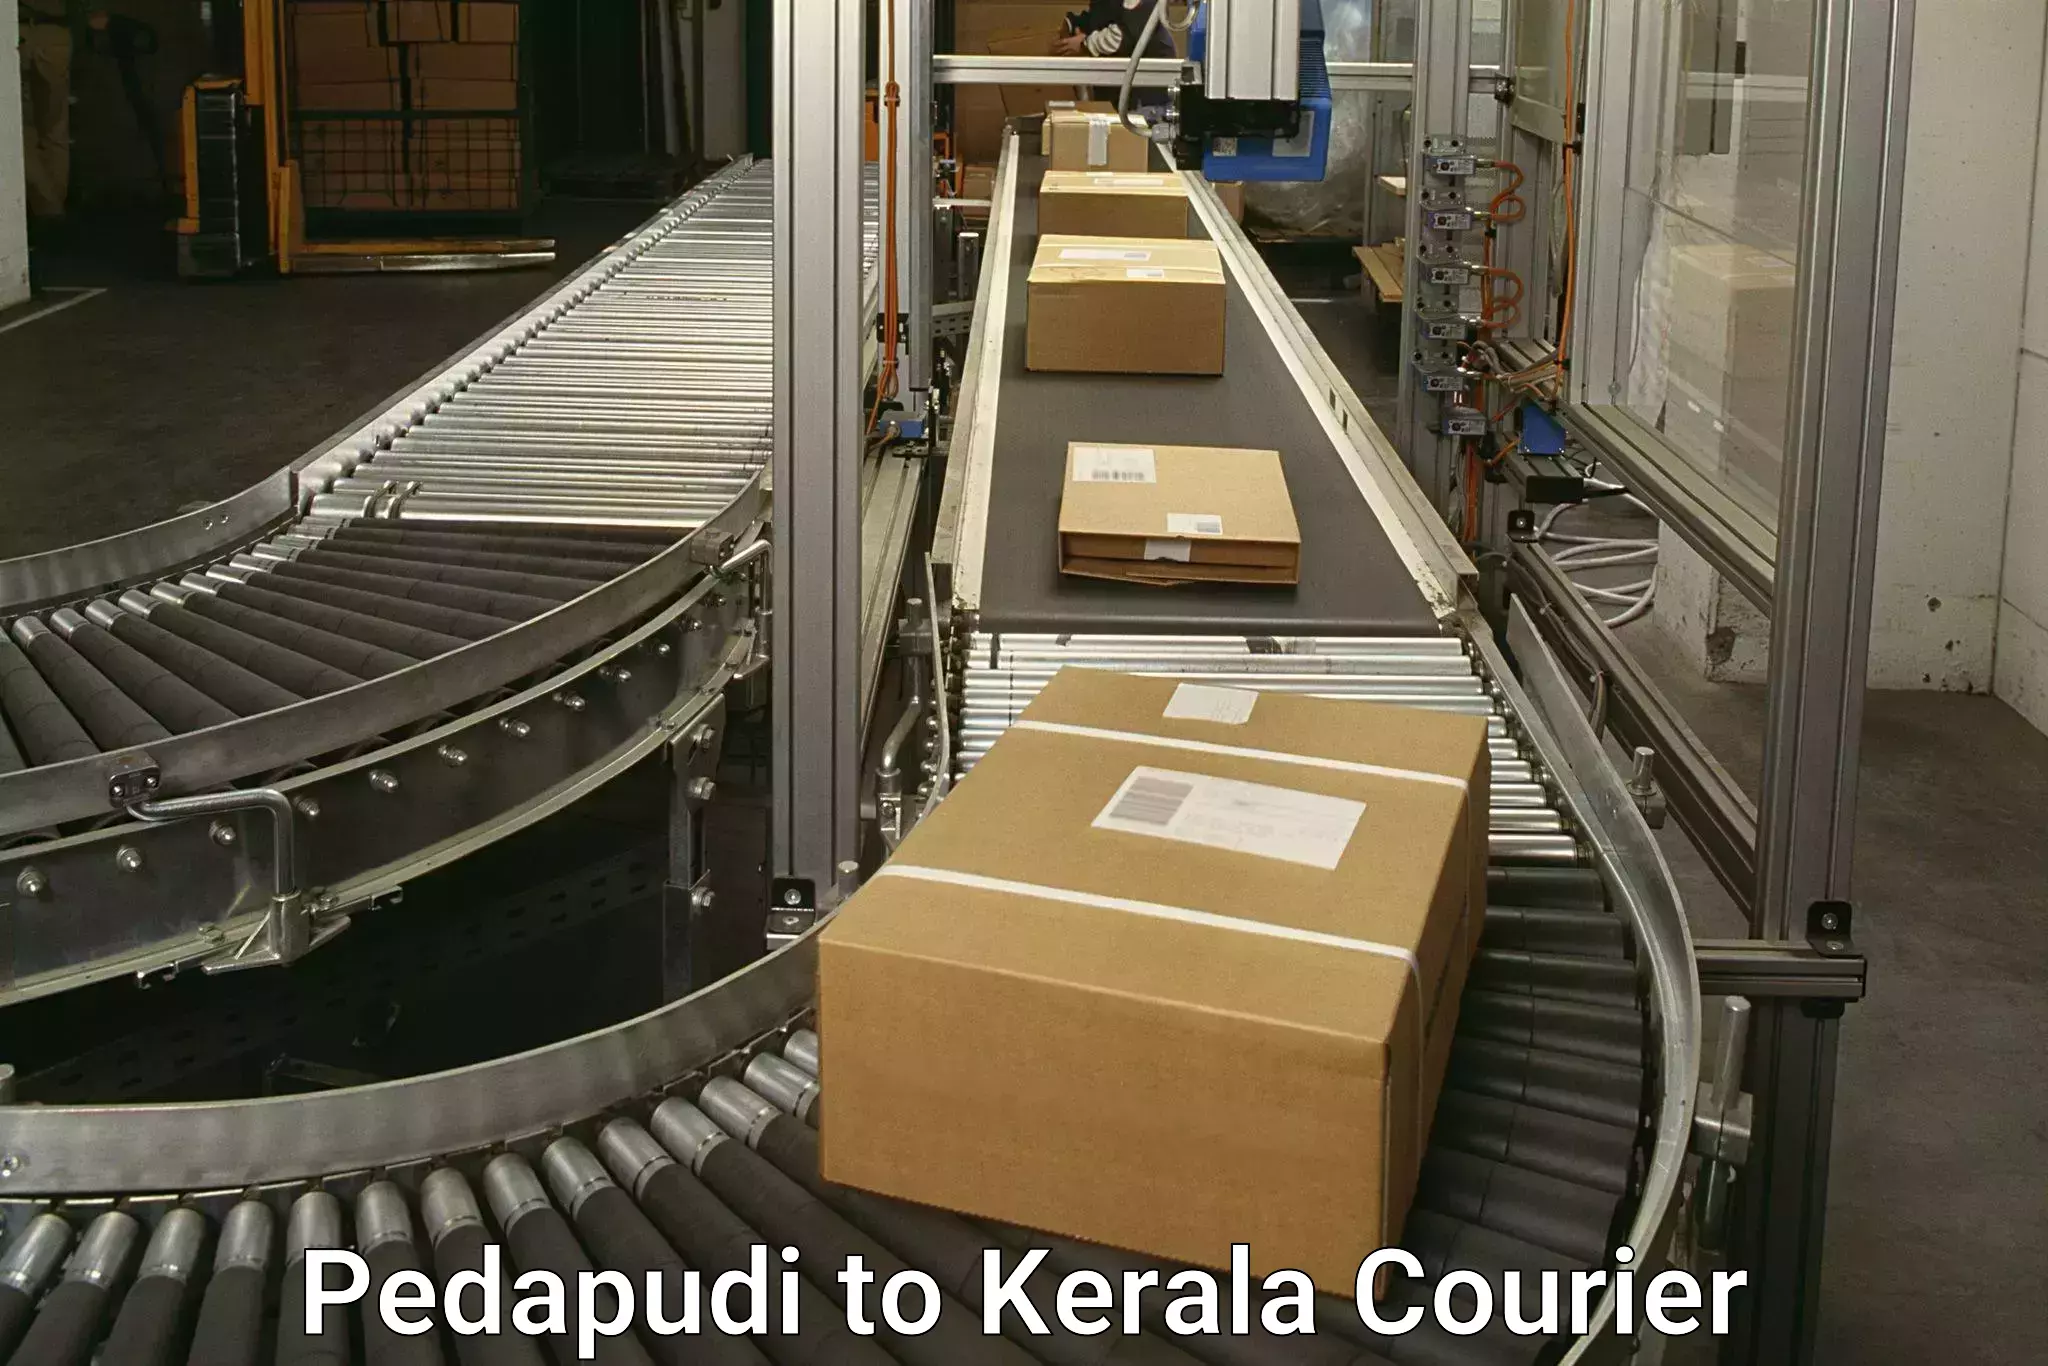 Quality courier partnerships Pedapudi to Cochin University of Science and Technology